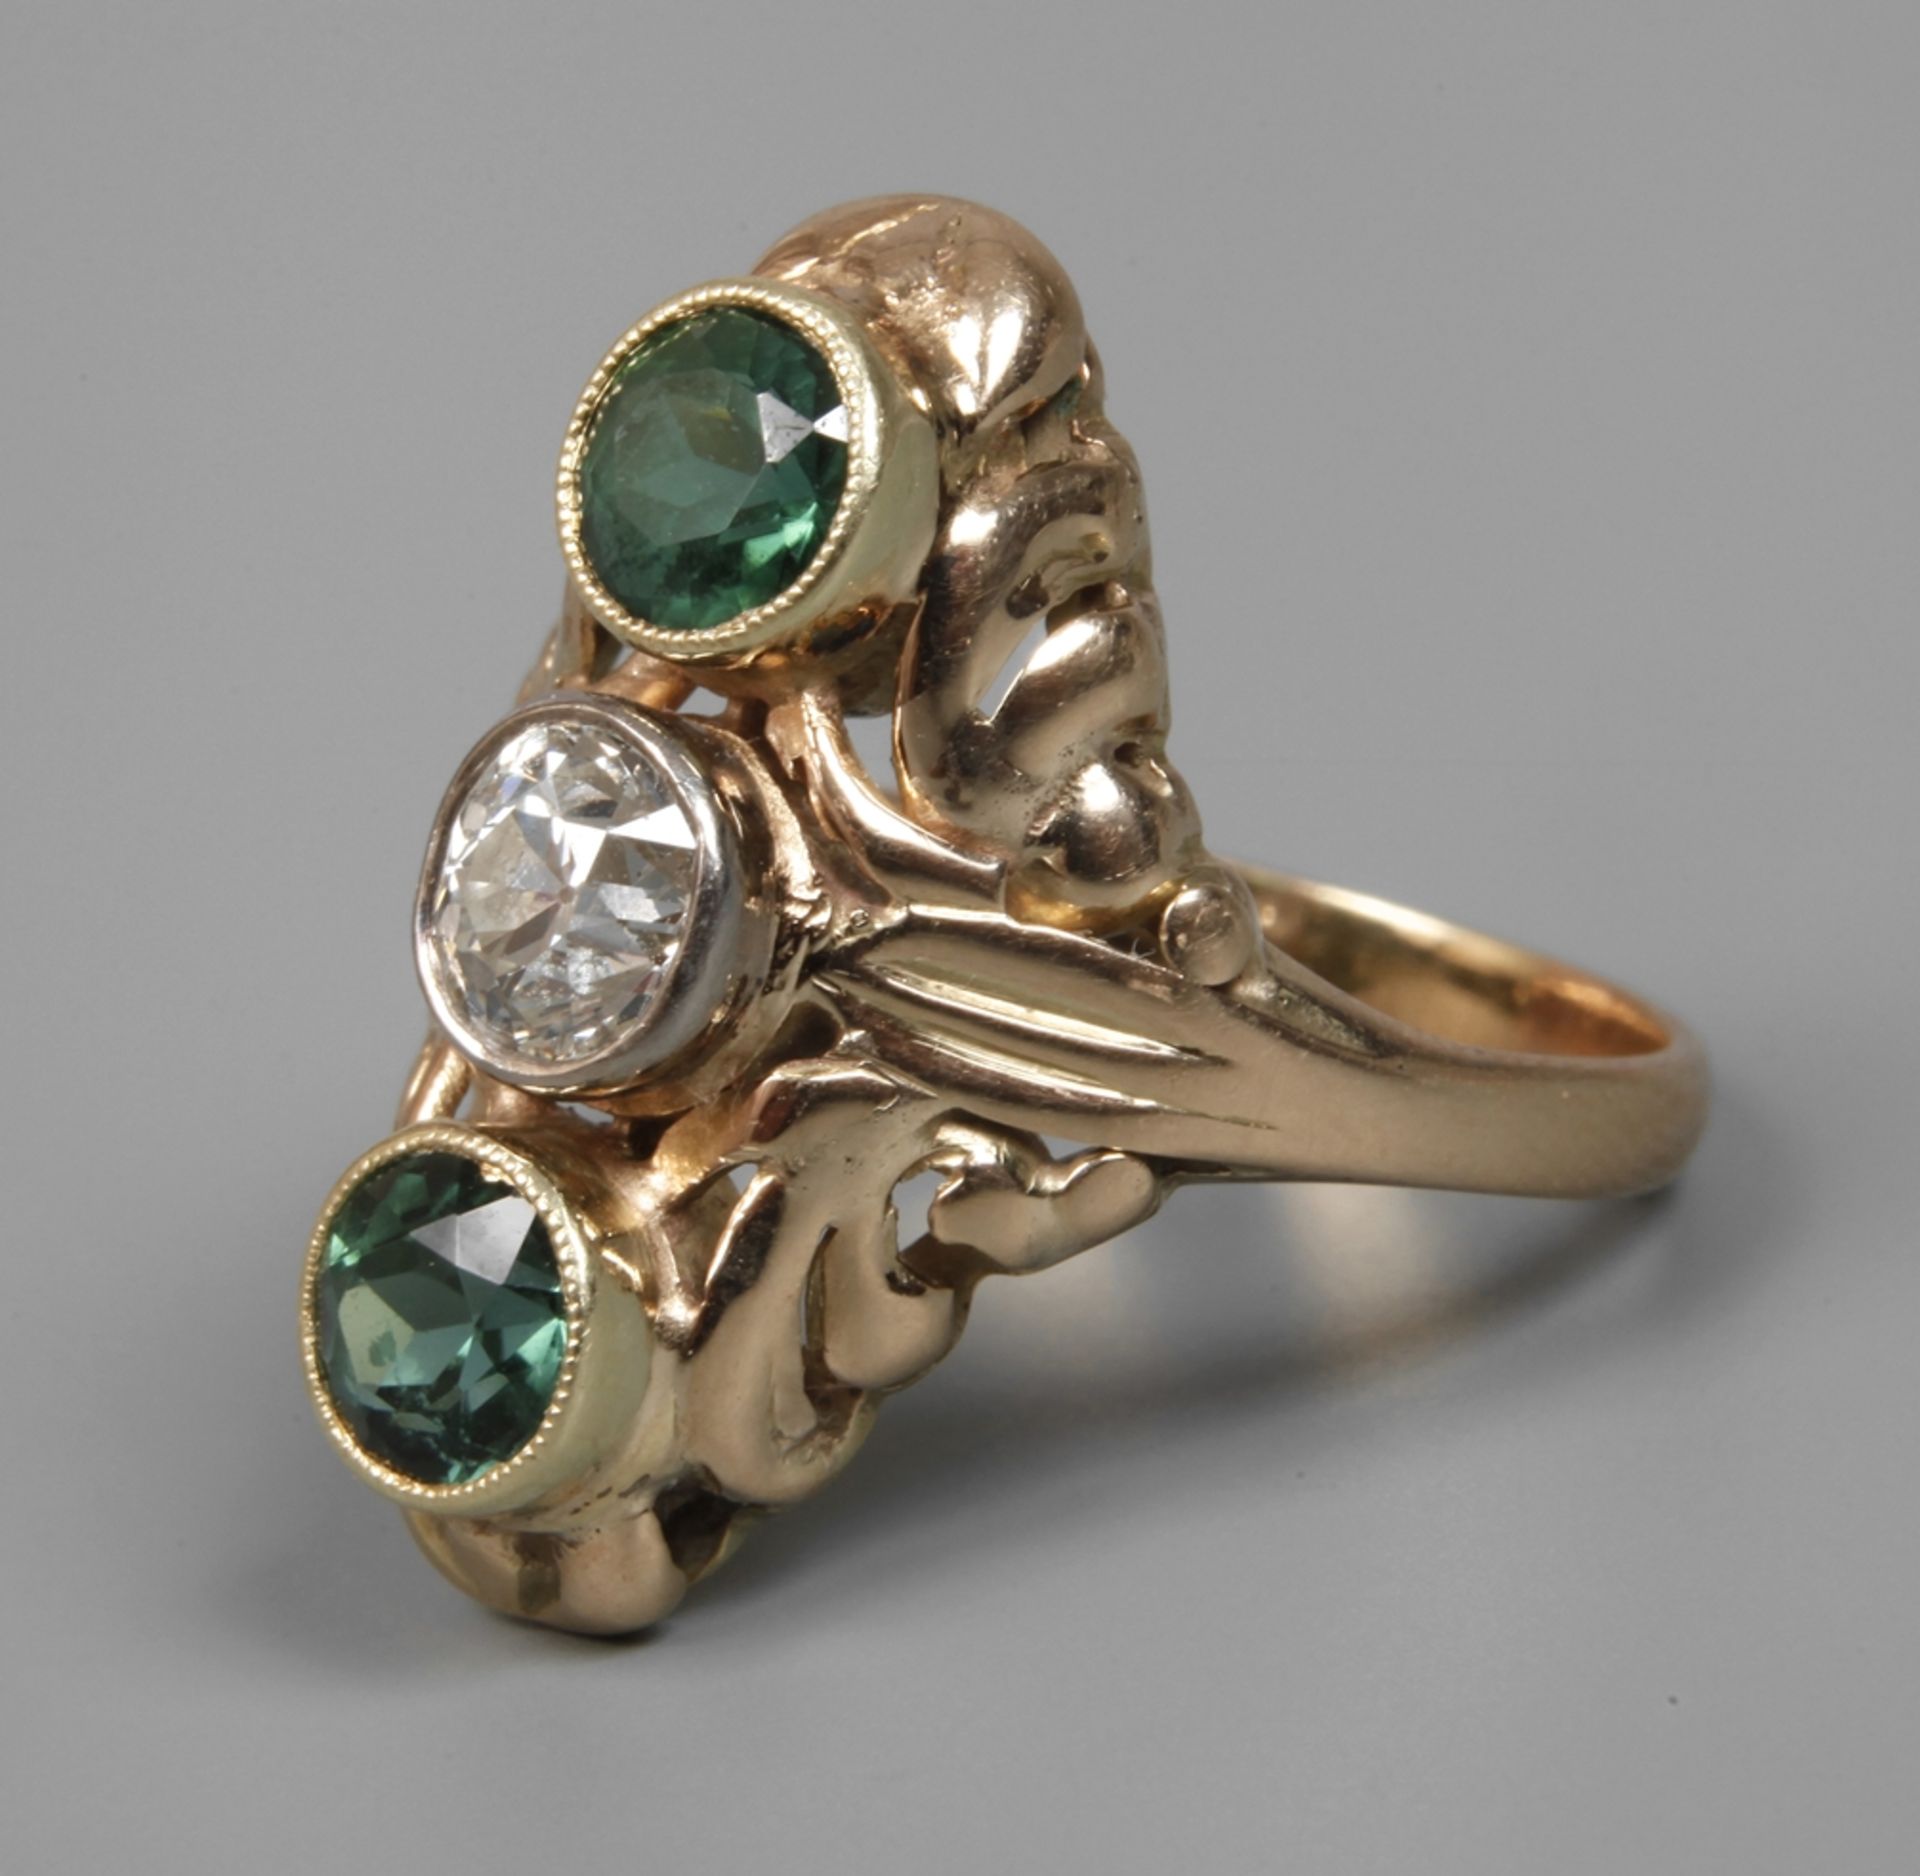 Lady's ring with tourmalines and diamond